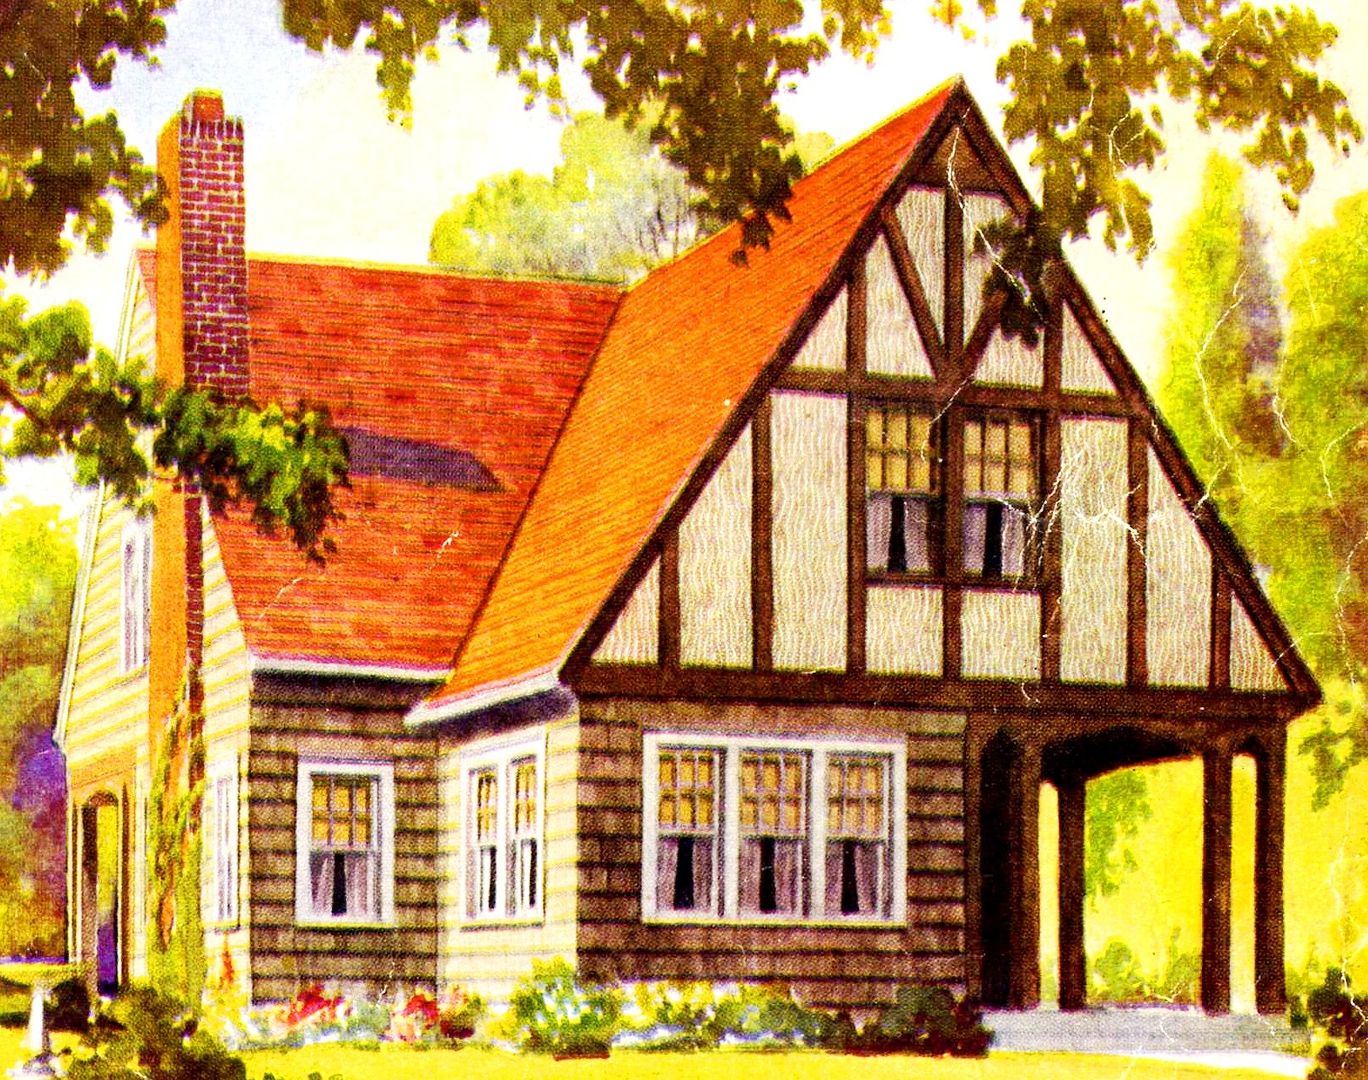 The Devonshire was one of those kit homes that was offered in the Wardway catalog, but not in the Gordon Van Tine catalog. It was on the cover of the 1931 (which was the last) Wardway catalog.